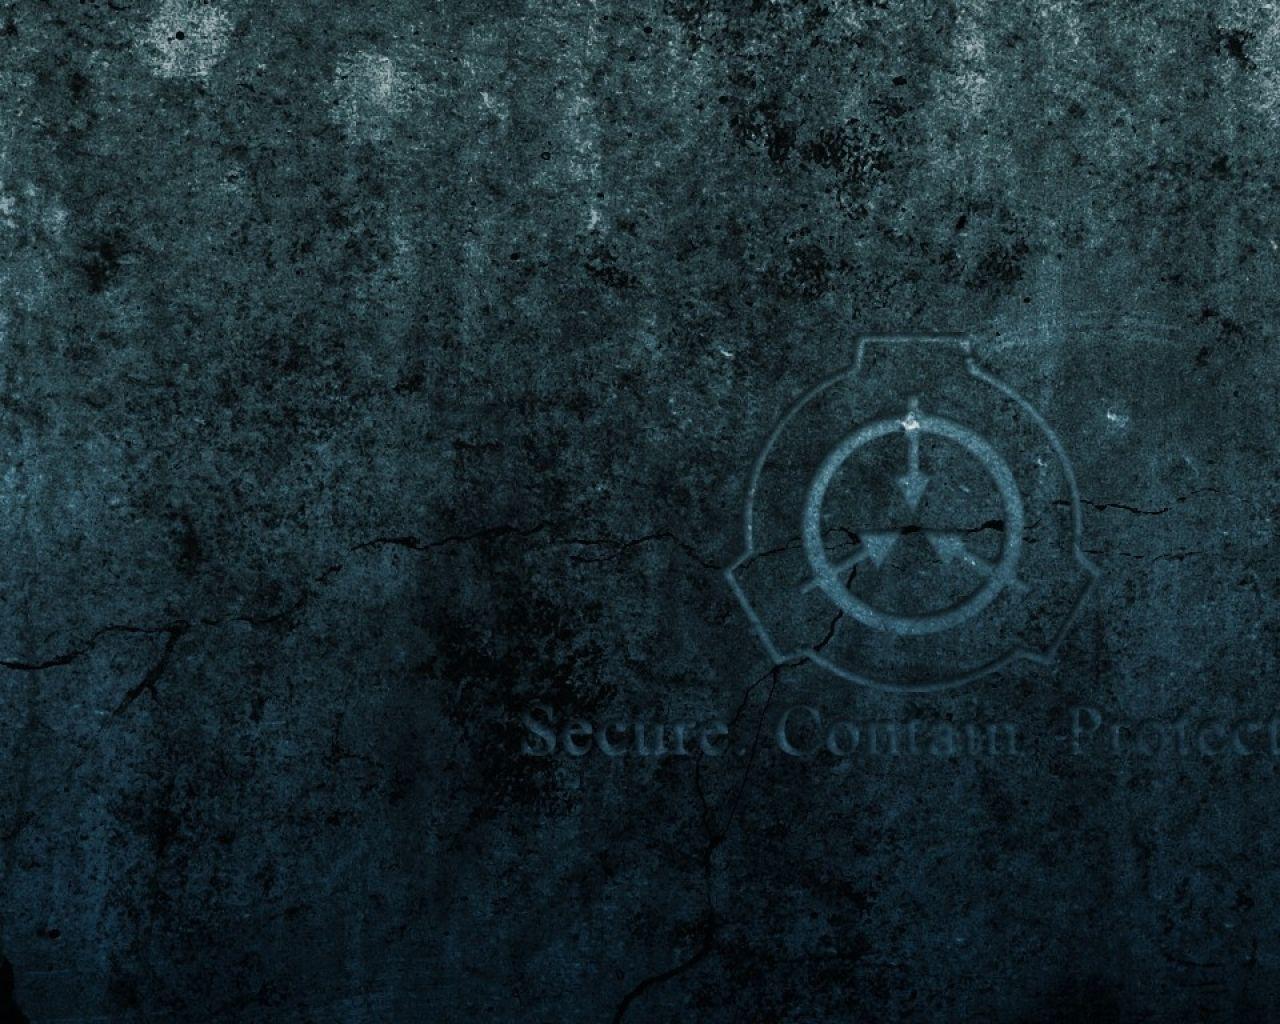 SCP Wallpapers - Wallpaper Cave